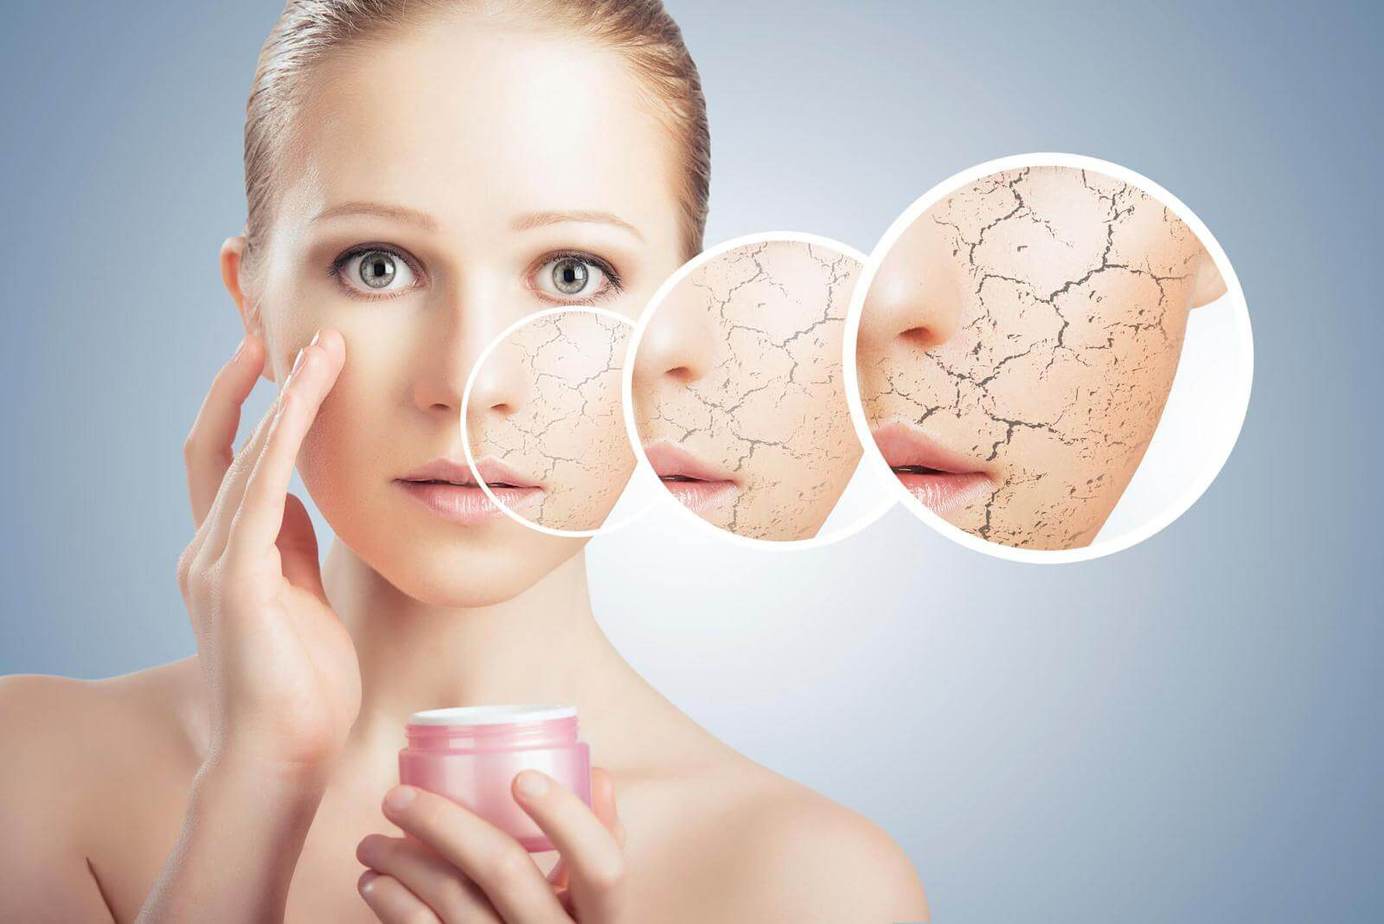 How to deal with dry skin effectively